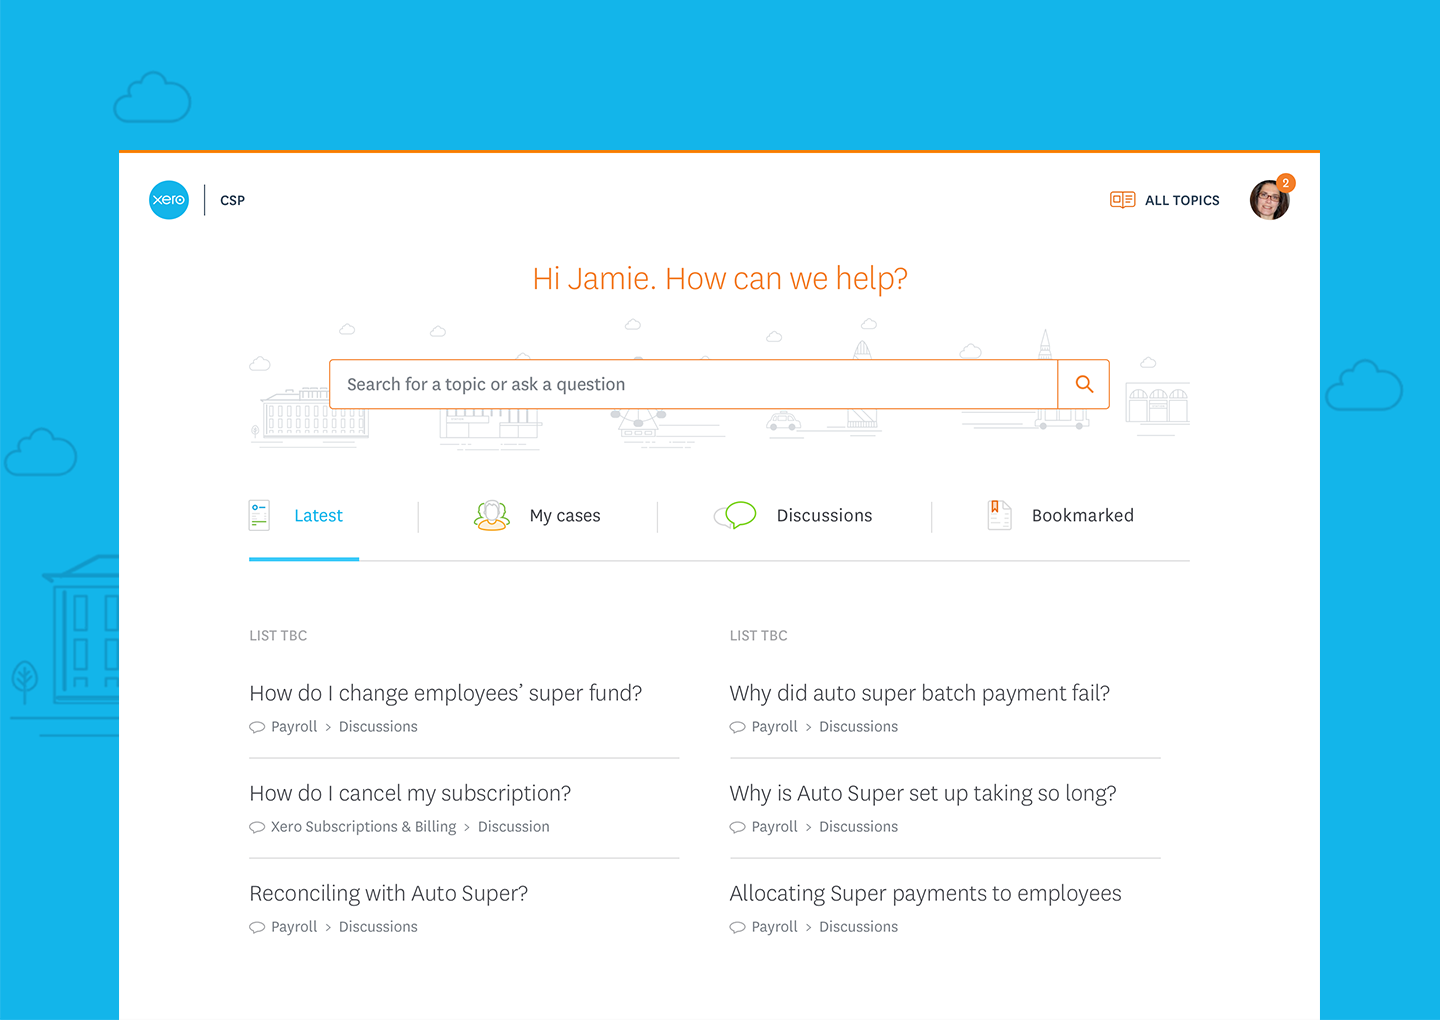 The Xero support interface